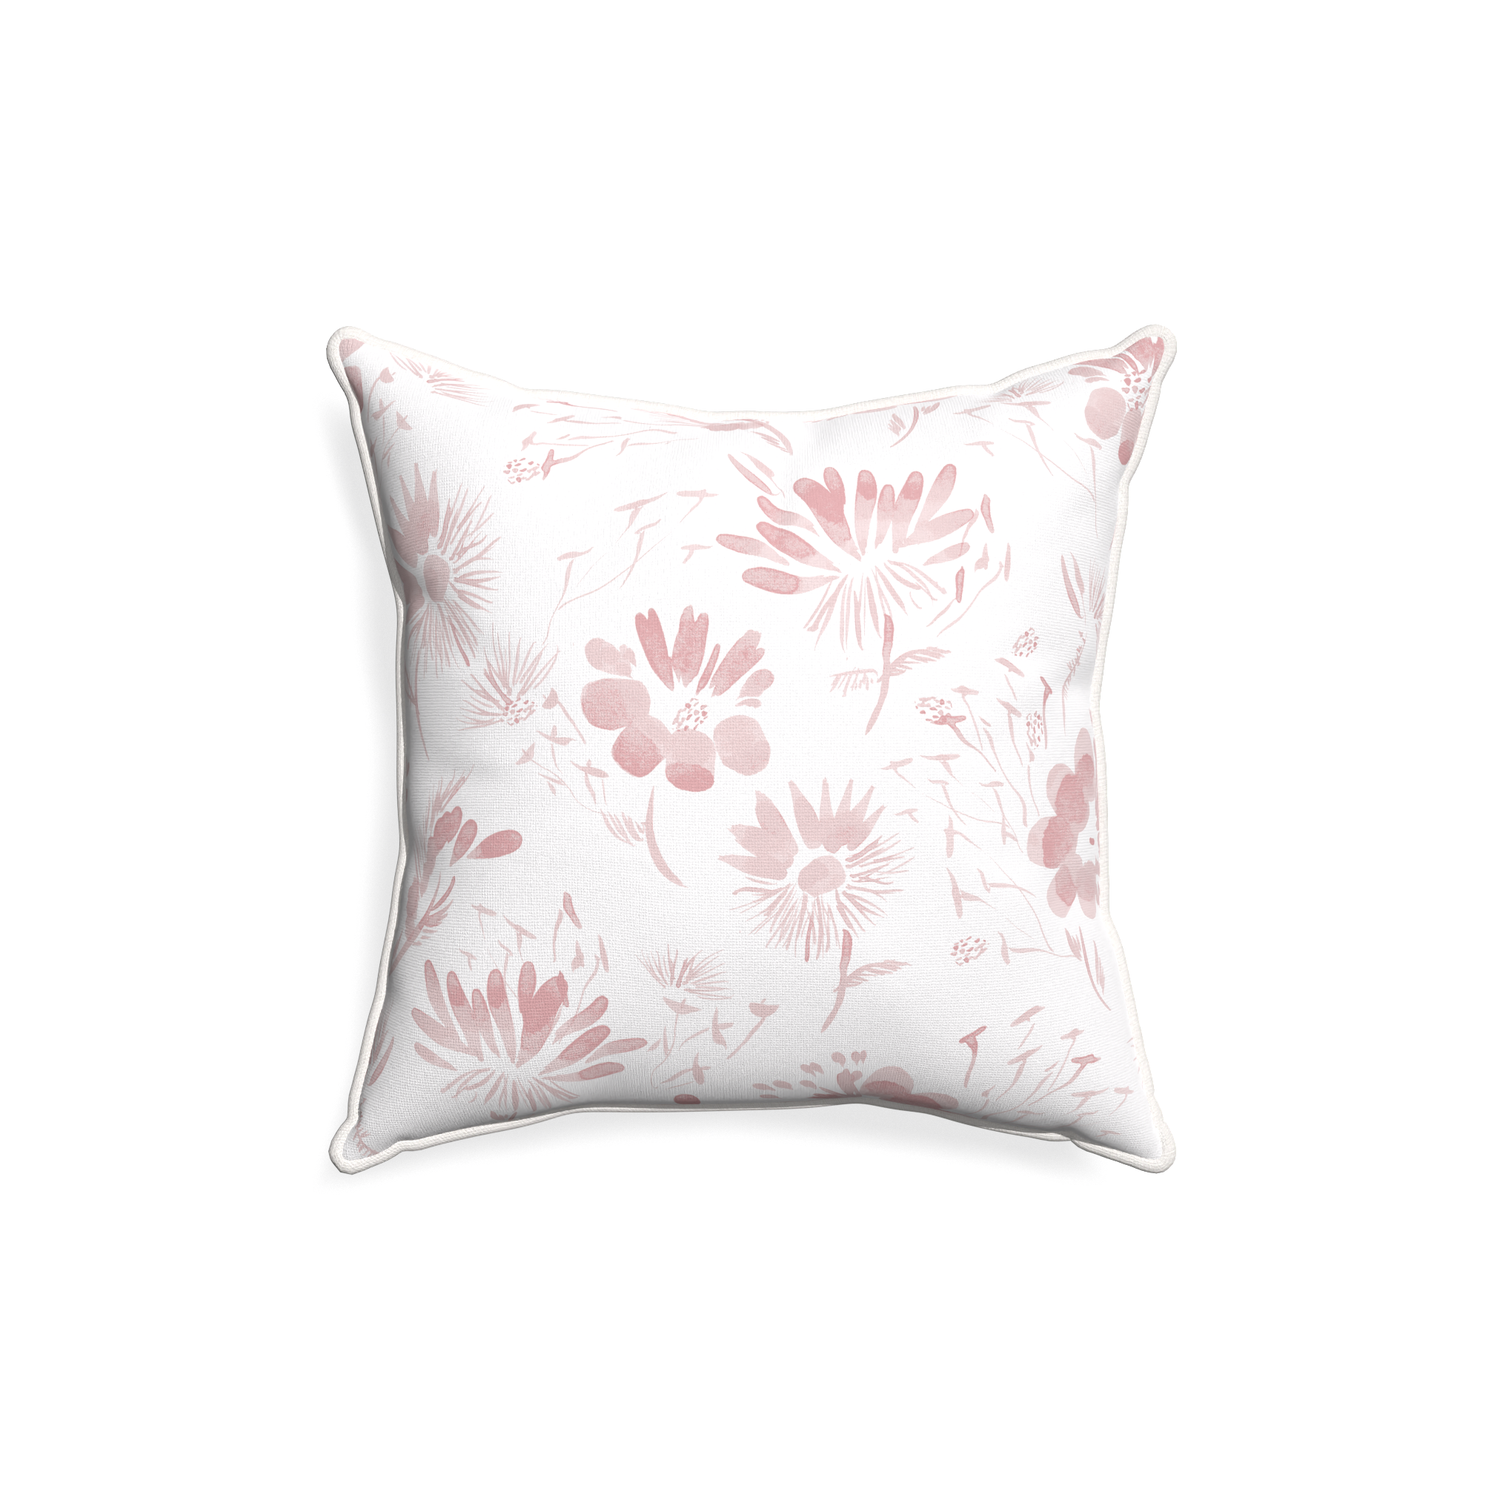 18-square blake custom pink floralpillow with snow piping on white background